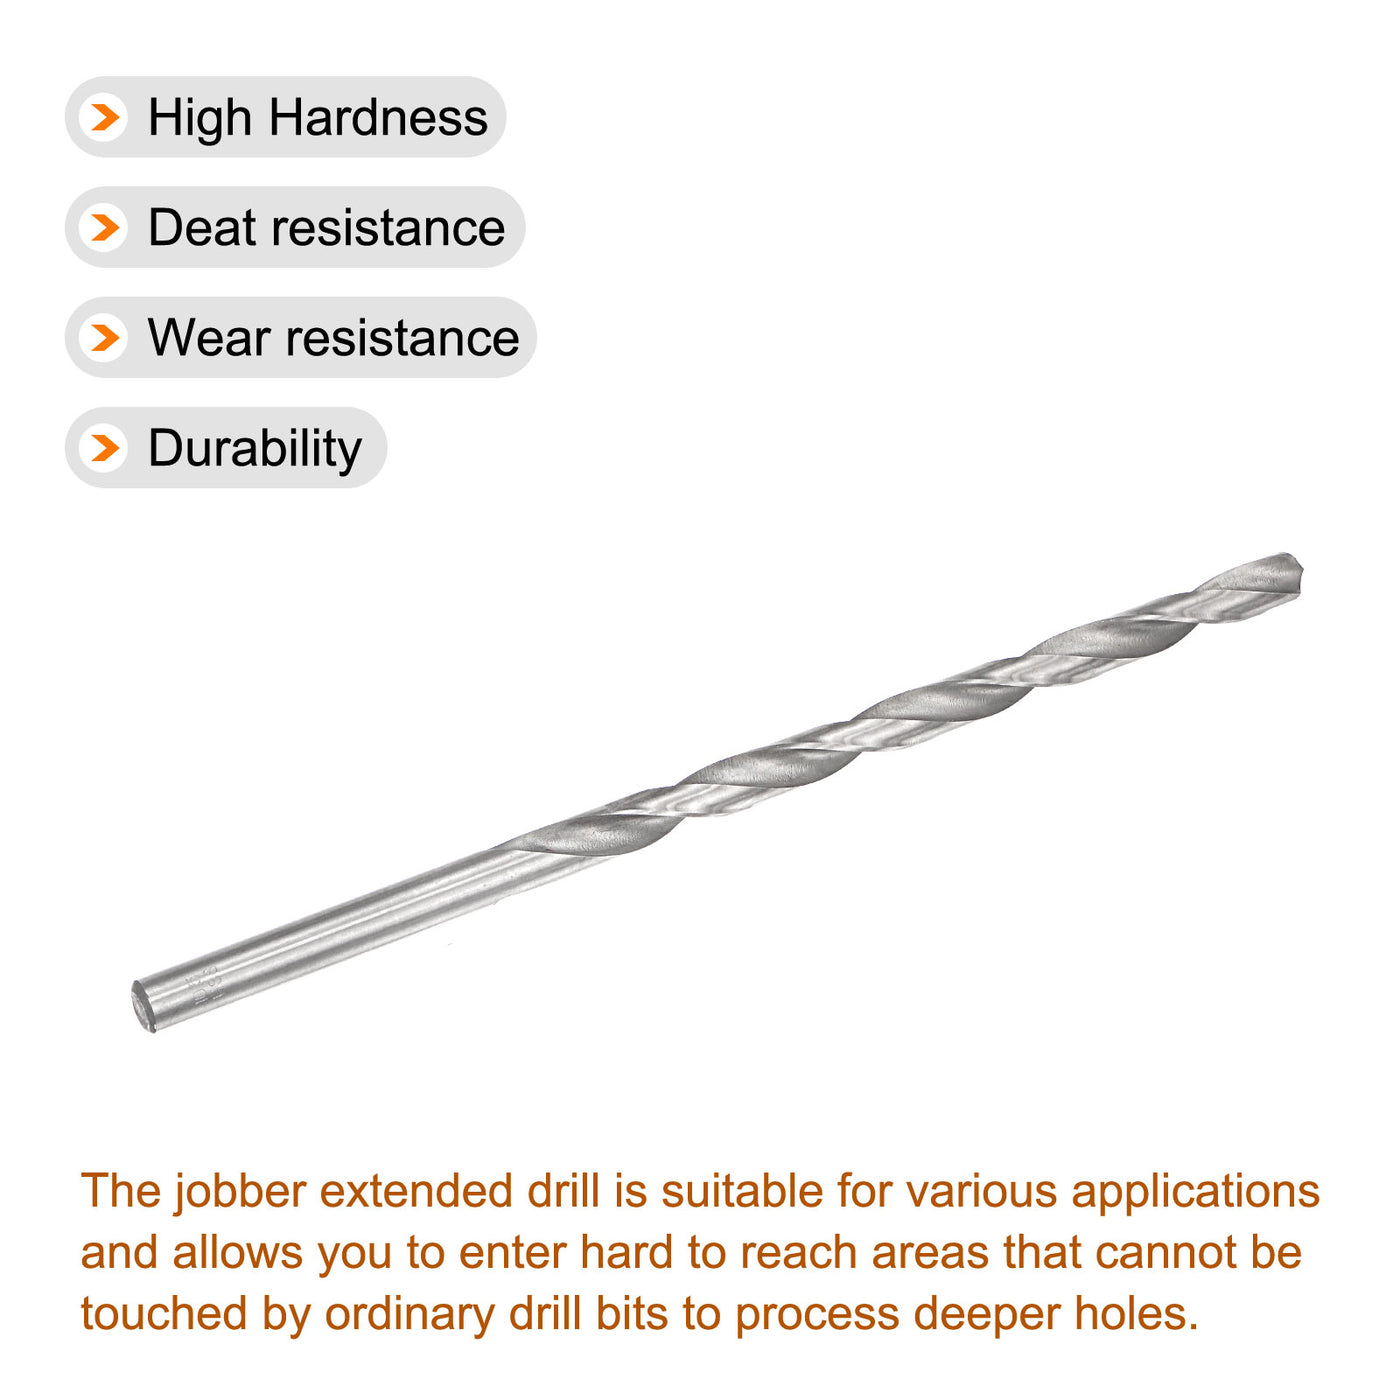 uxcell Uxcell 10.5mm Twist Drill Bits, High-Speed Steel Extra Long Drill Bit 250mm Length